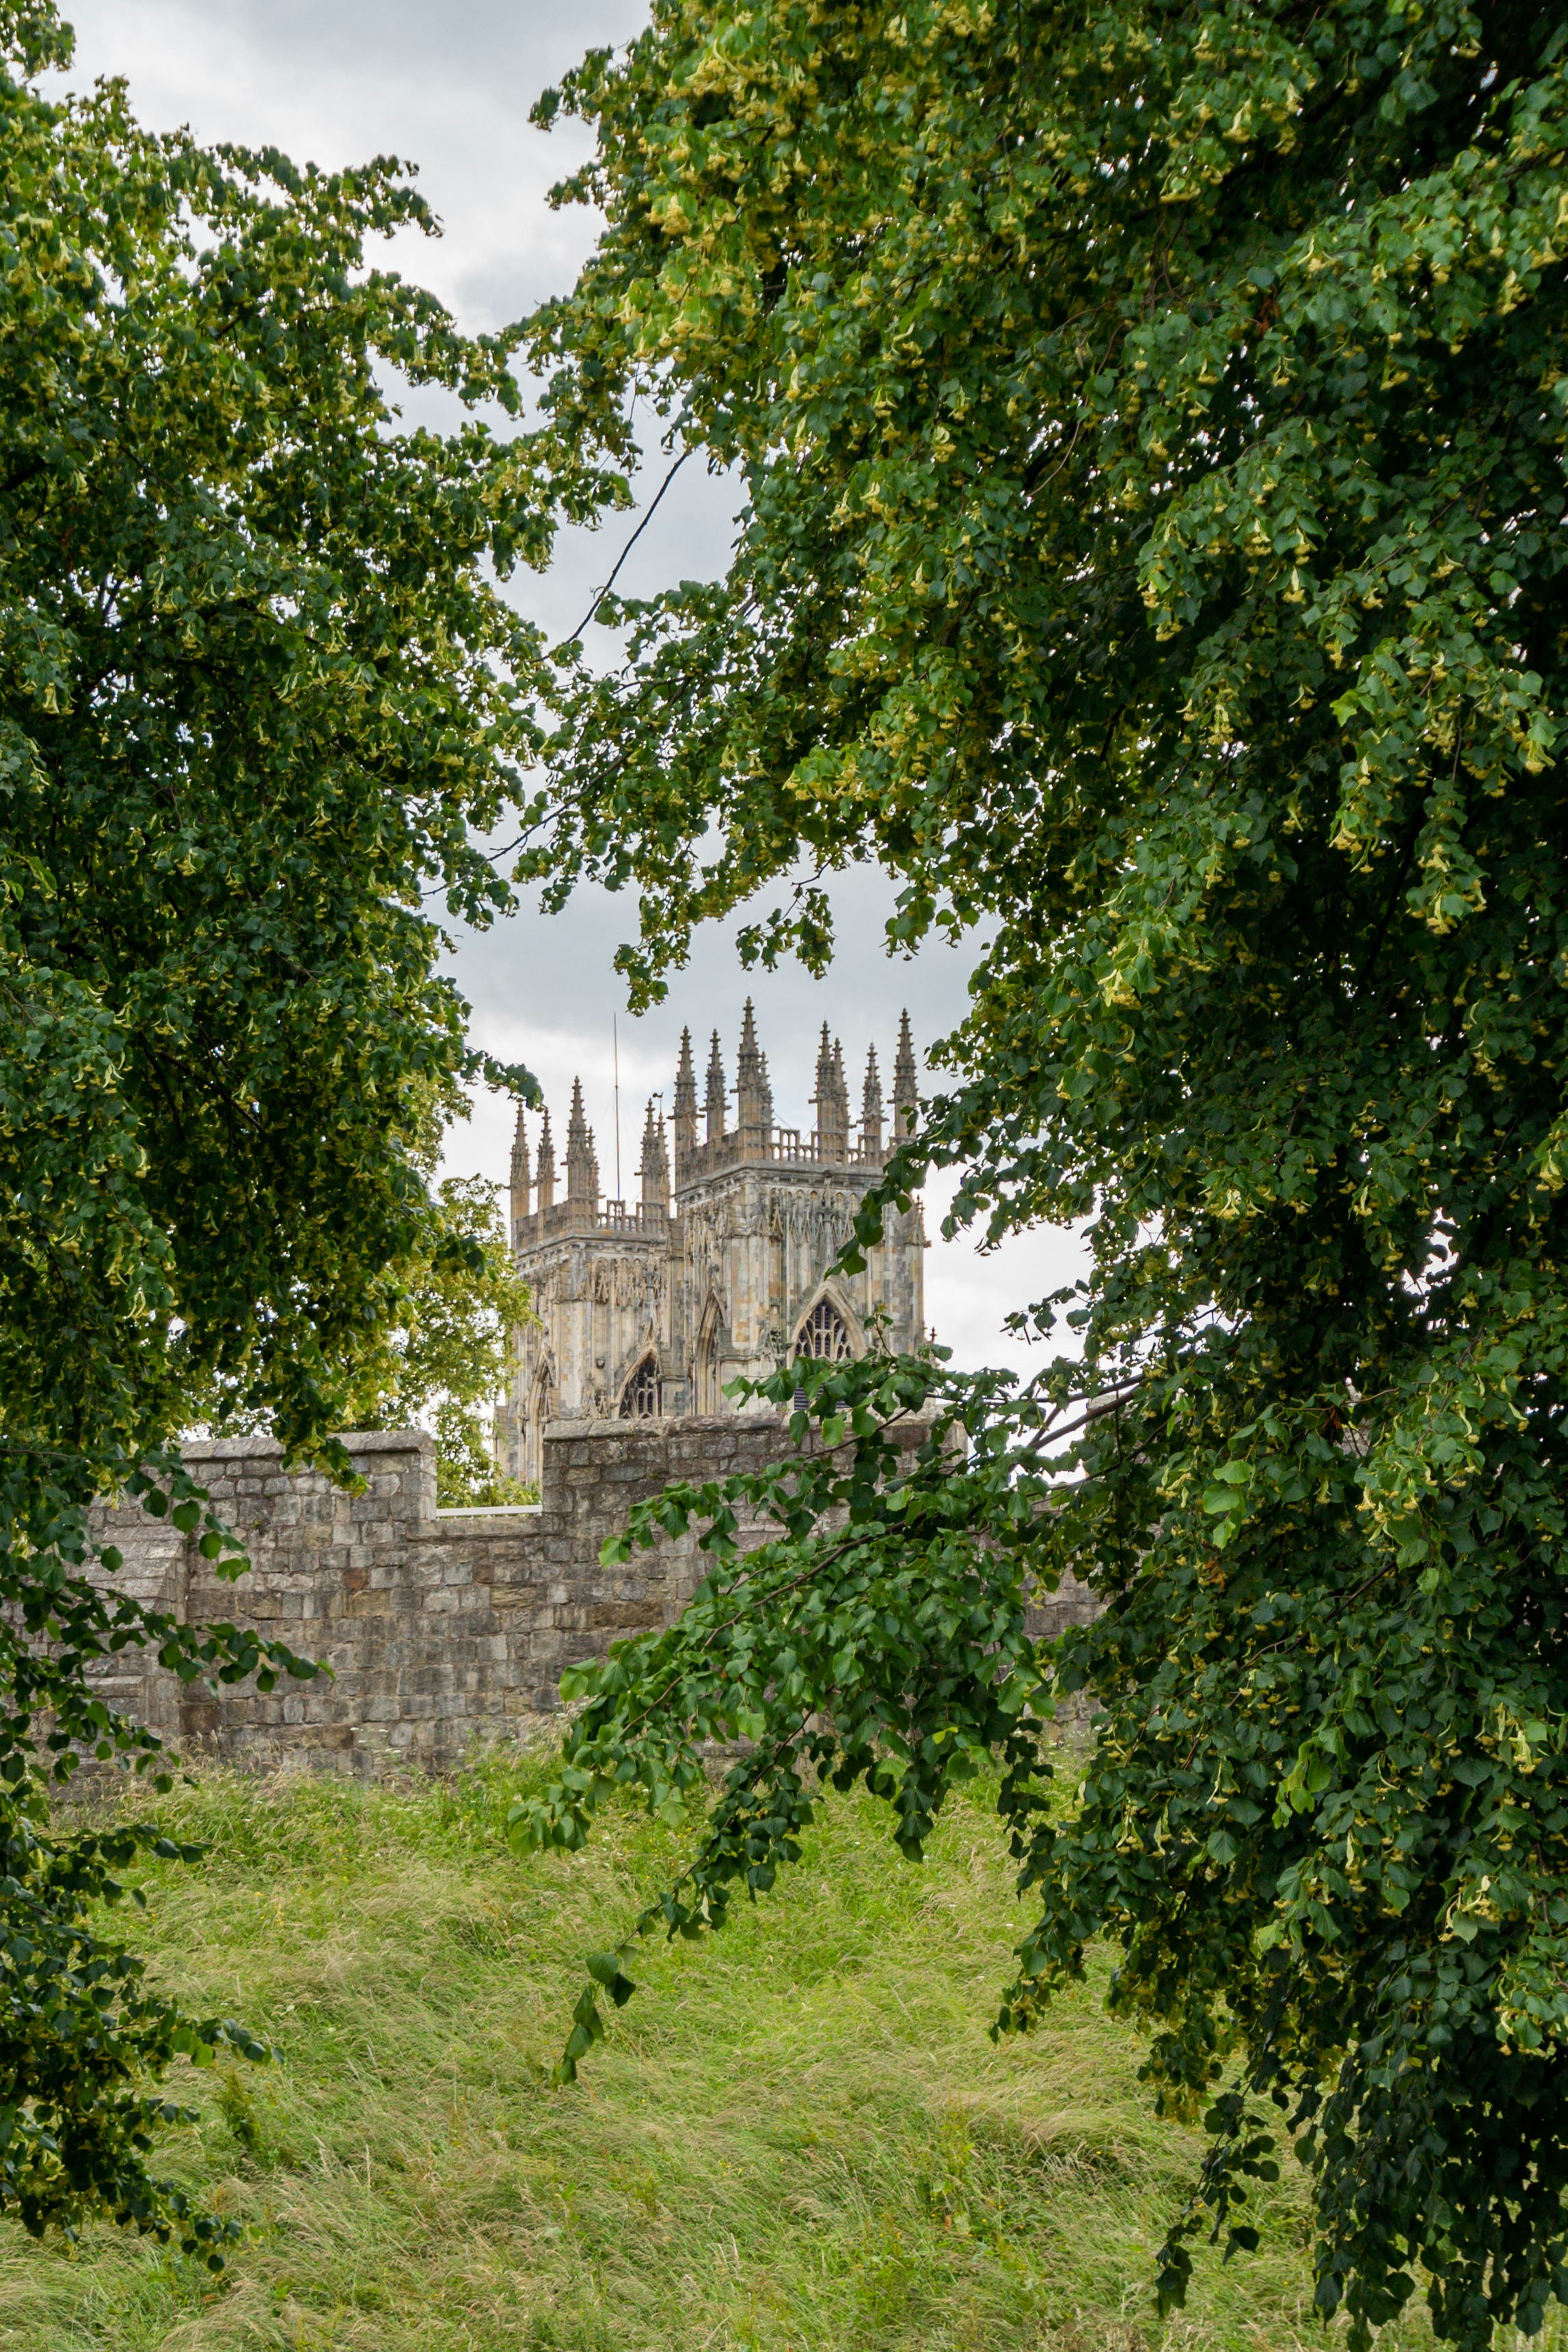 The York Minster through the trees, like a magnificent modern day medieval castle.